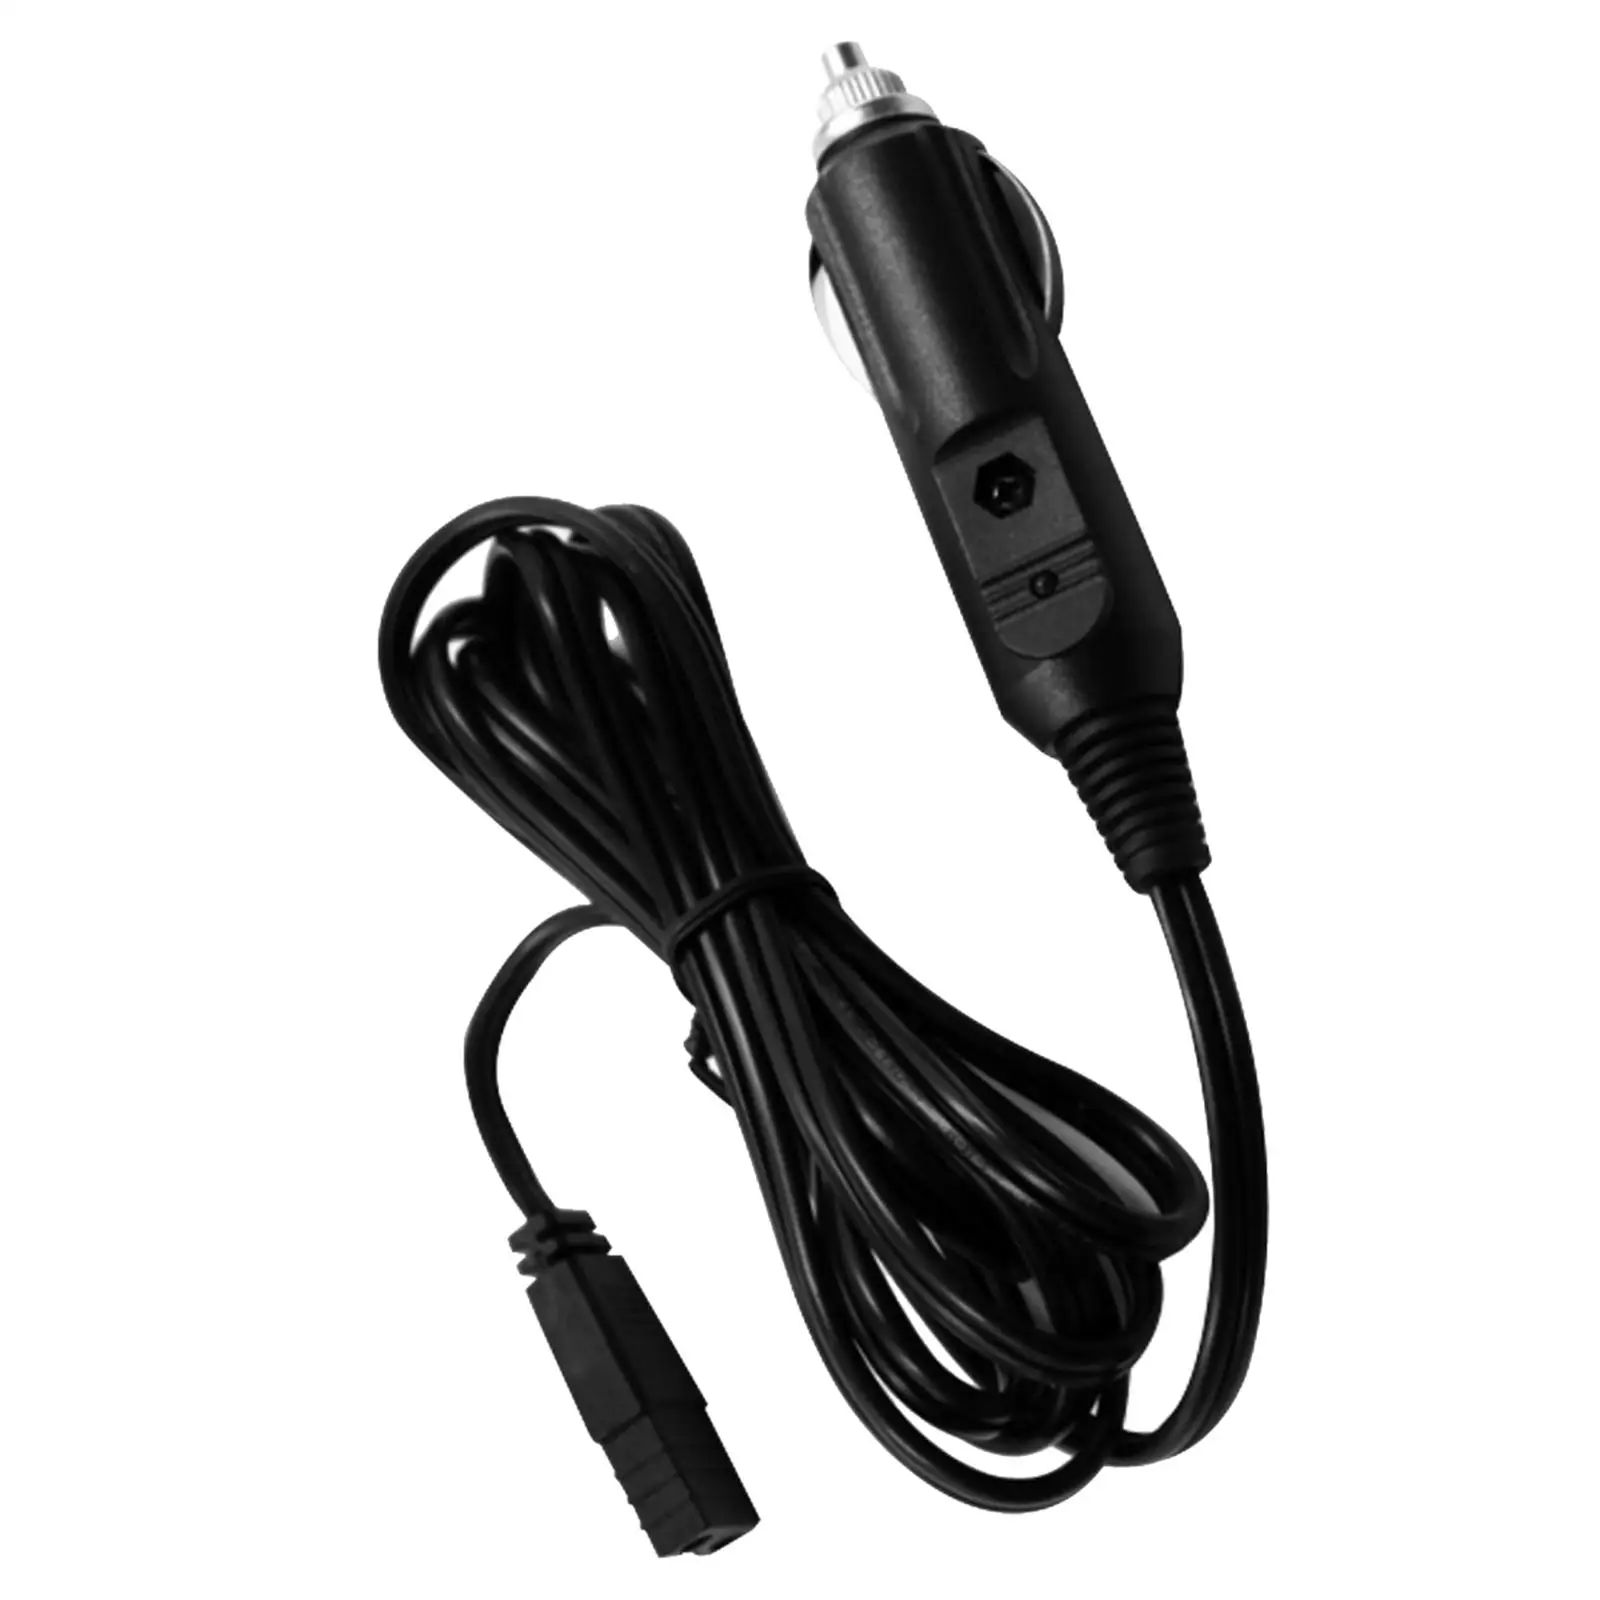 63inch Power Cable Cord 12-24V for Car Fridge Freezer Exquisite Design Widely Used Space Saving Black Simple Installation